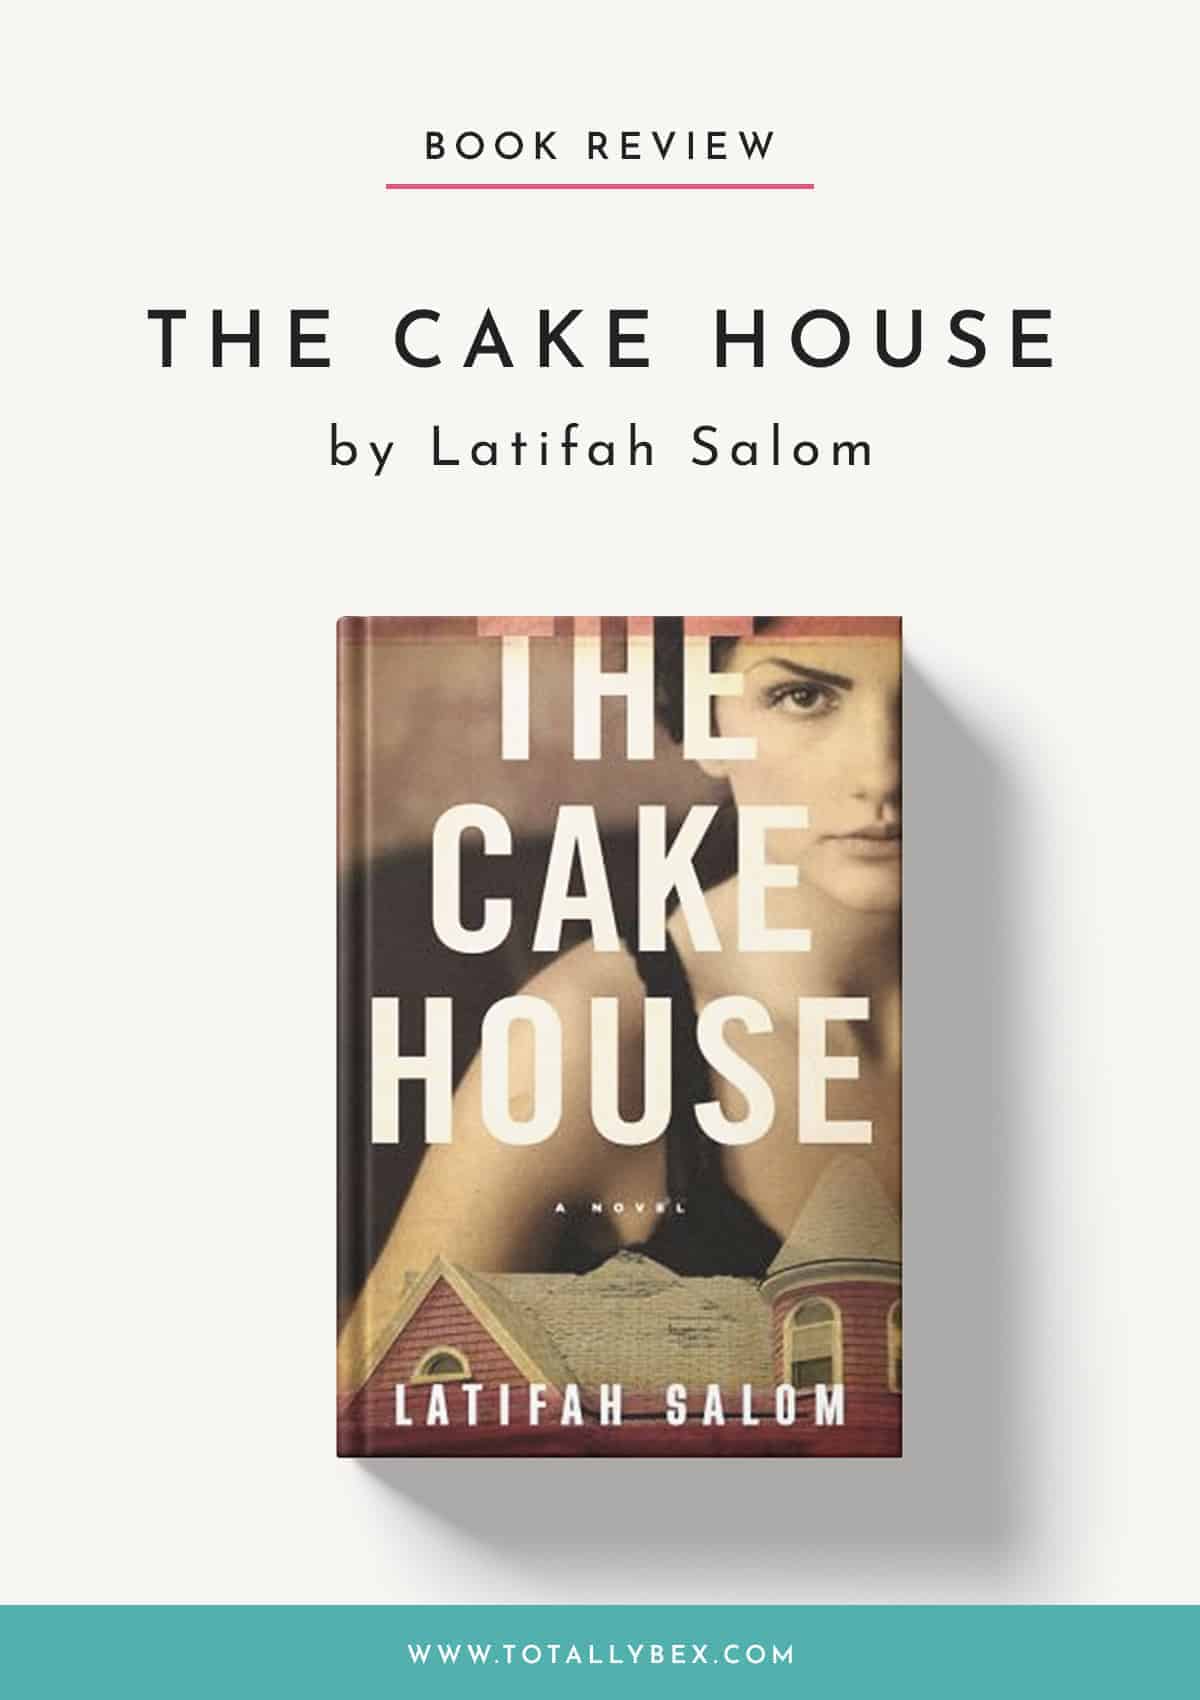 The Cake House by Latifah Salom-Book Review